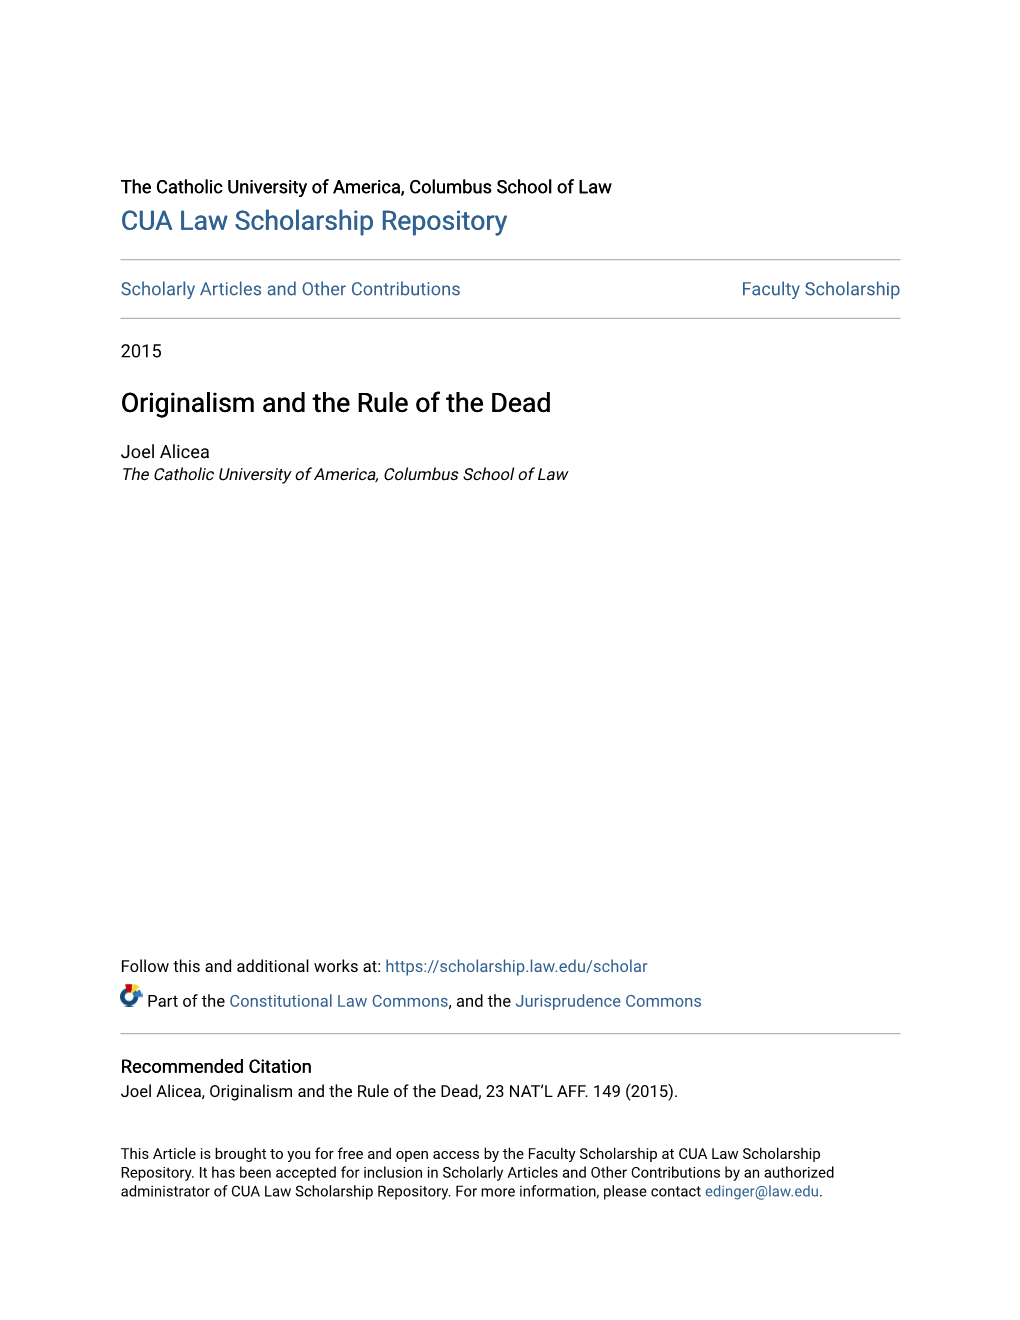 Originalism and the Rule of the Dead